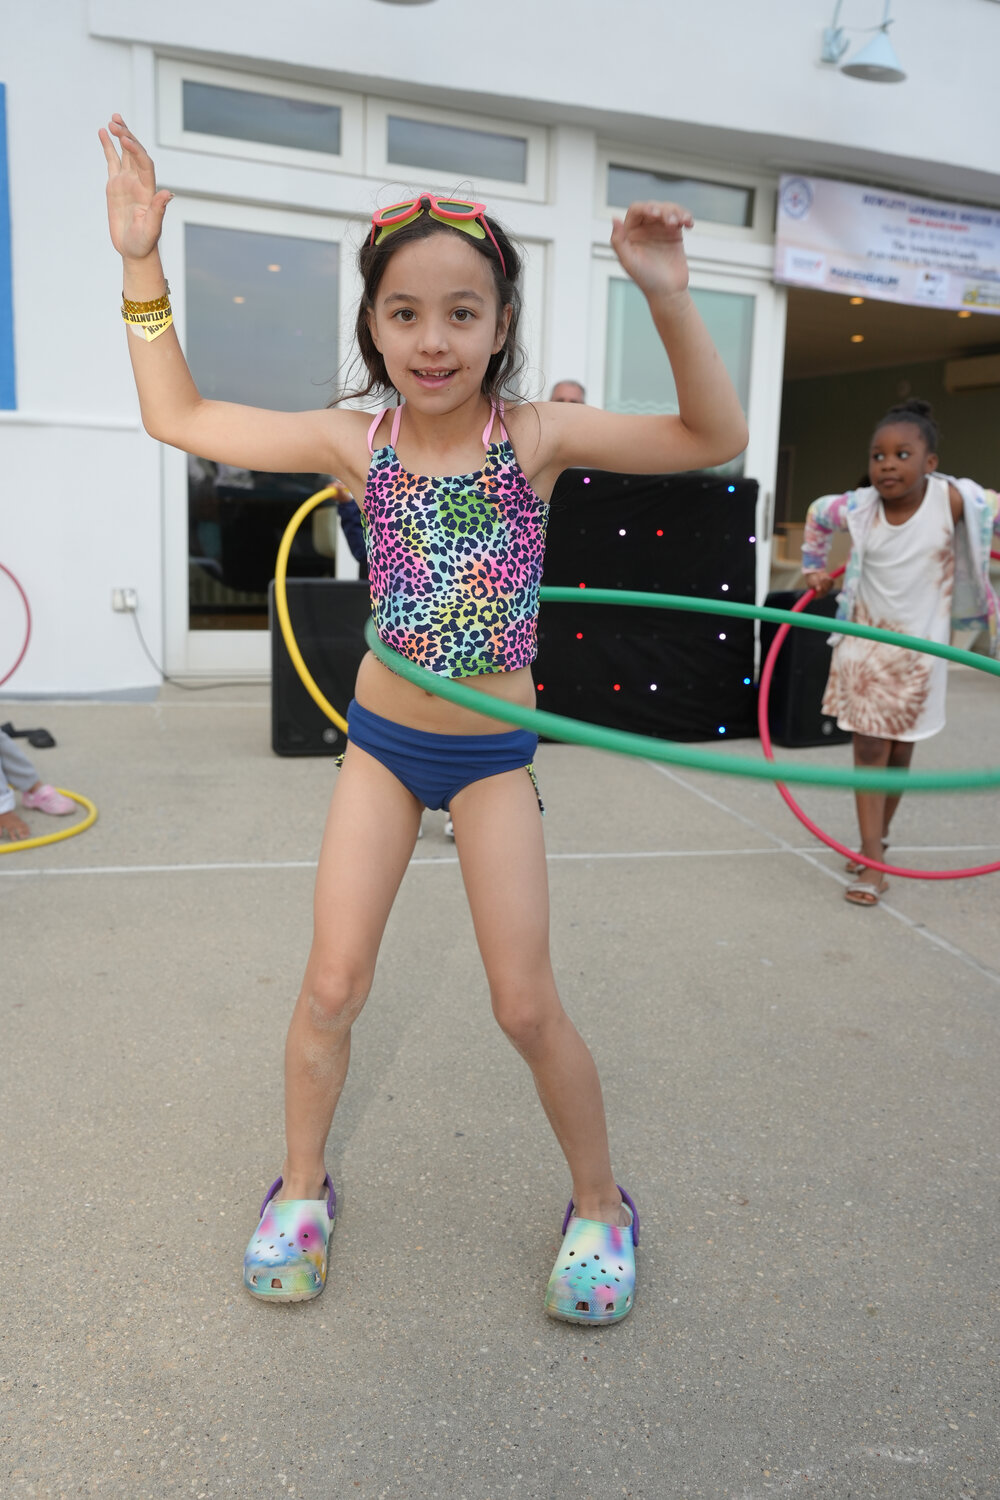 Julia Becker showed off here hula hooping skills at the soccer club’s season-ending party.